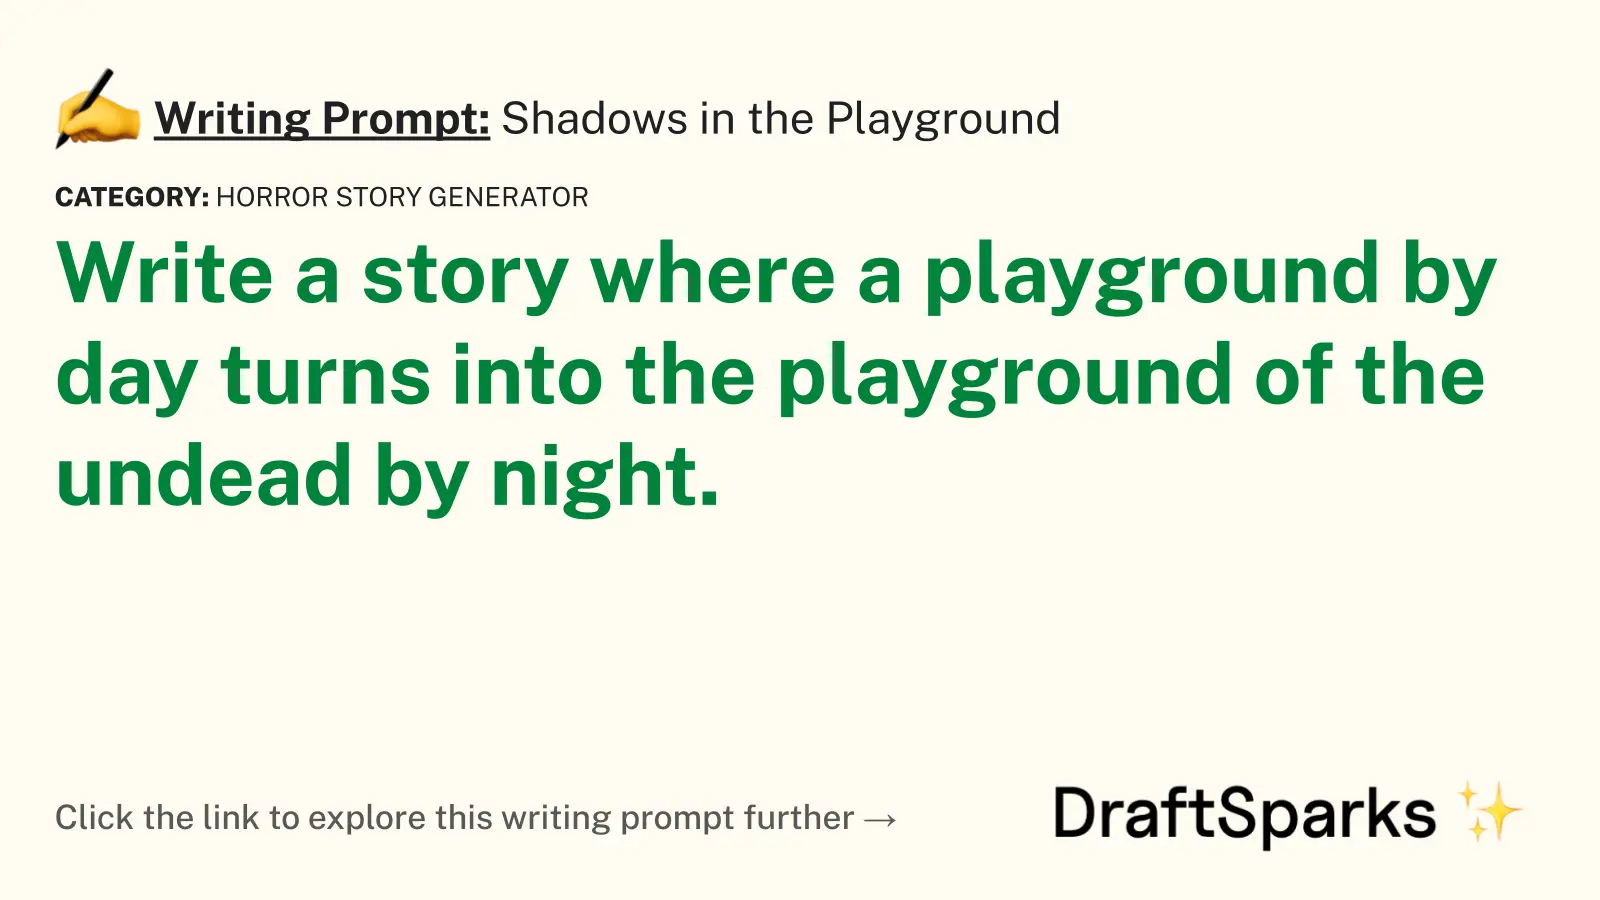 Shadows in the Playground